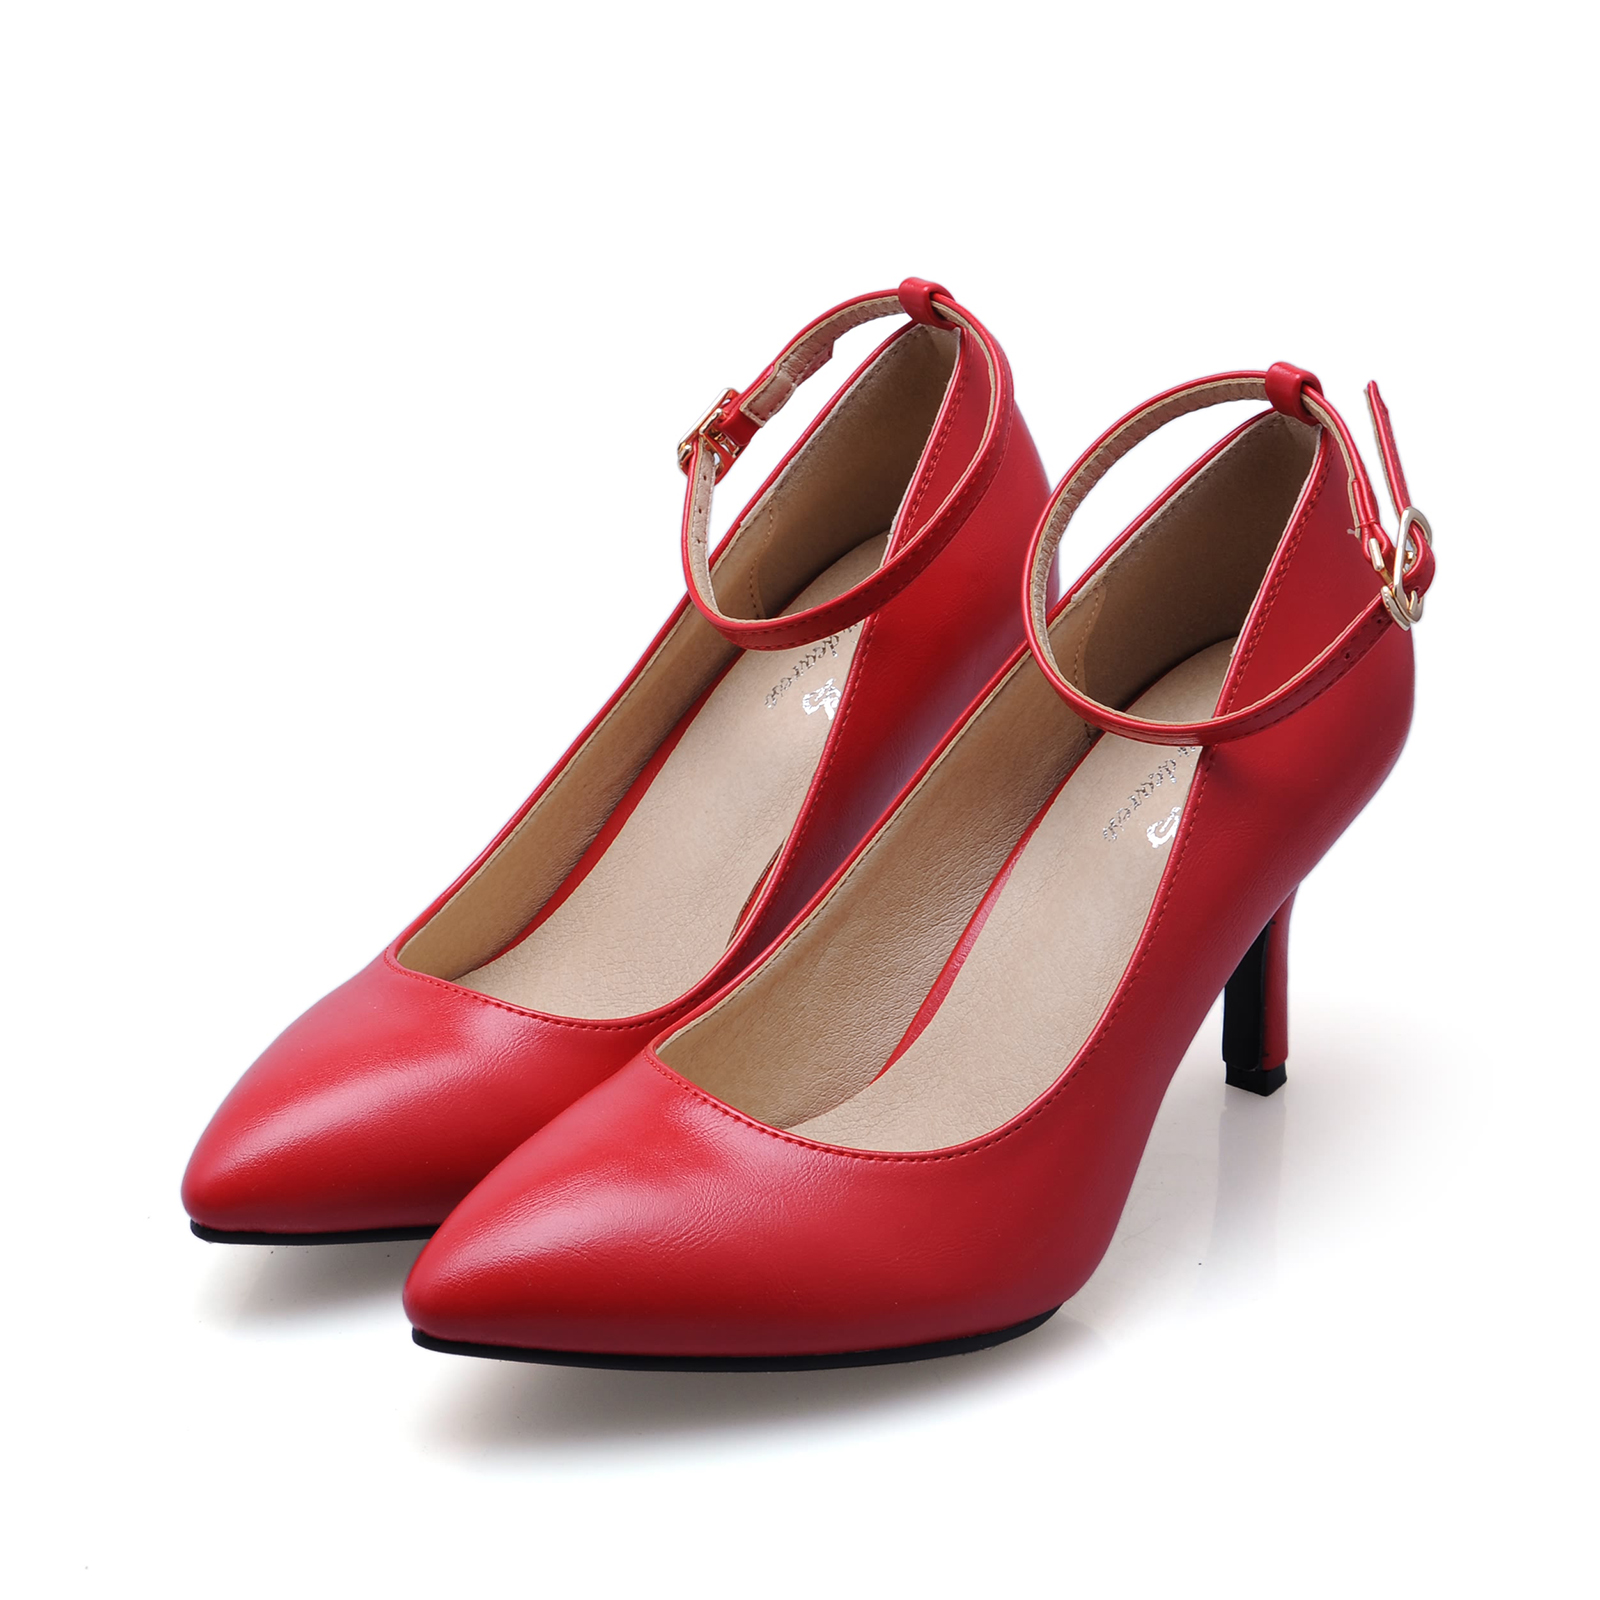 Mary Jane Pumps Promotion-Shop for Promotional Mary Jane Pumps on ...